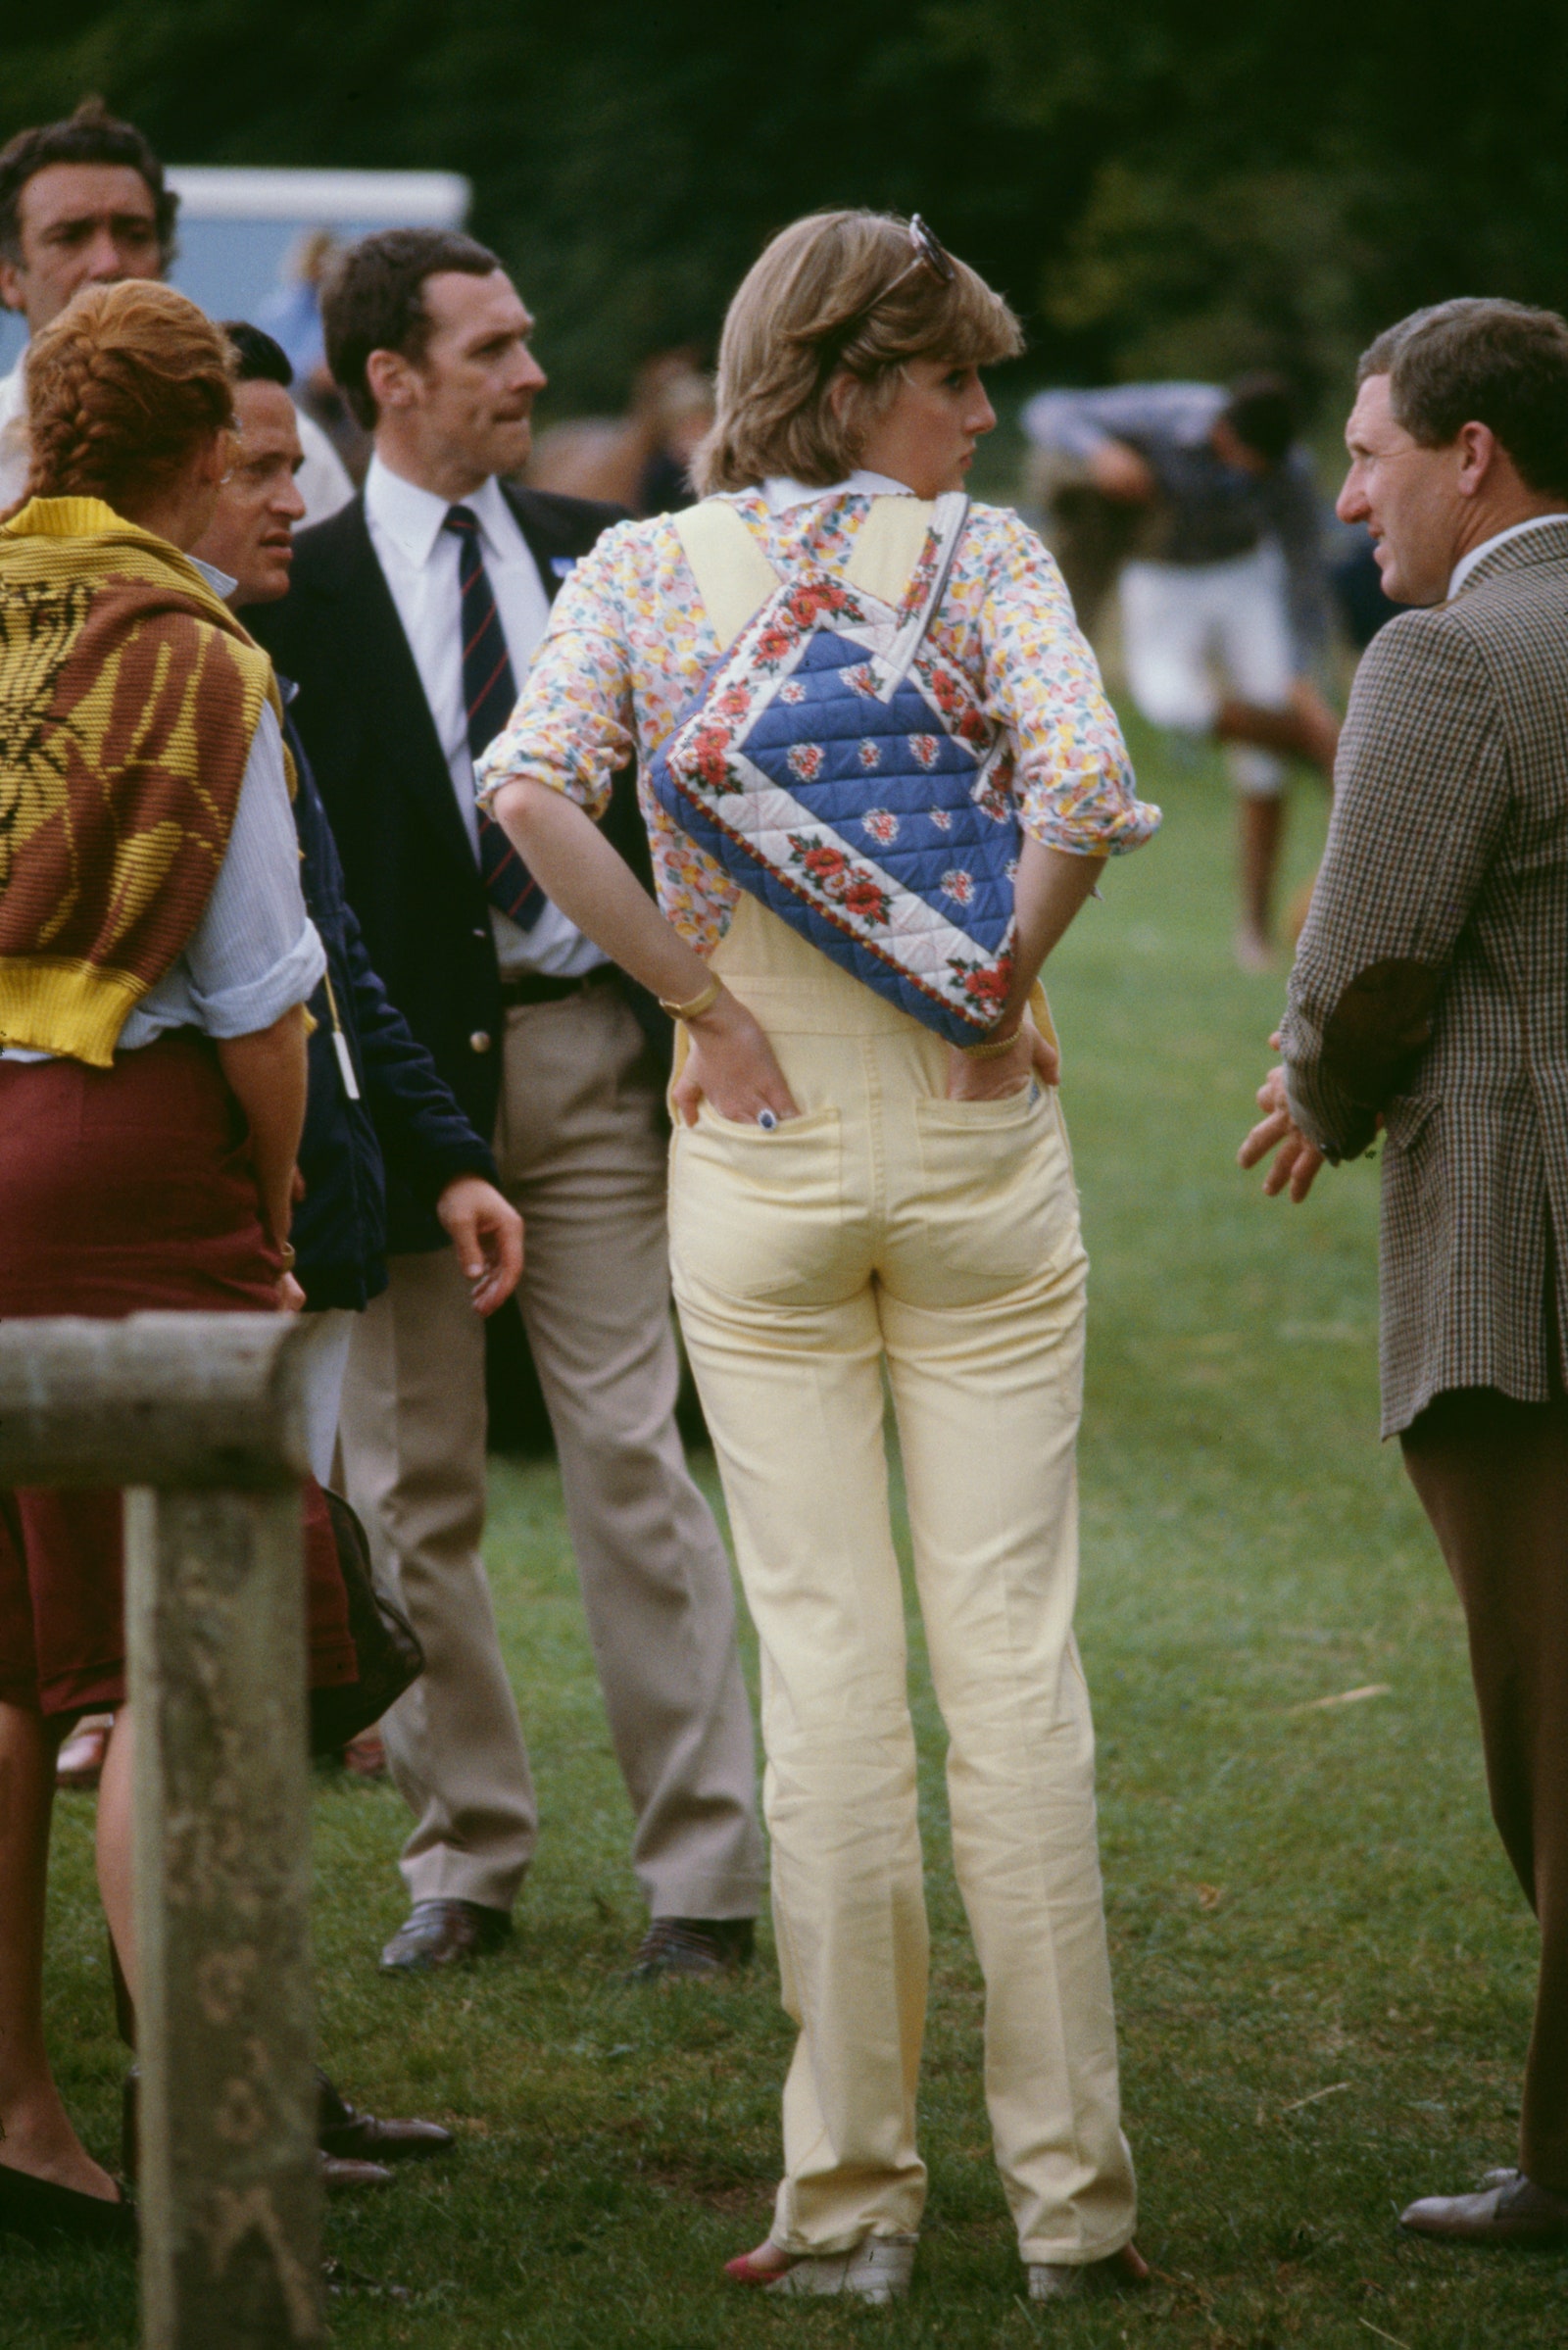 Lady Diana Spencer  at Cowdray Park Polo Club in Gloucestershire 12th July 1981. On the left is Sarah Ferguson.